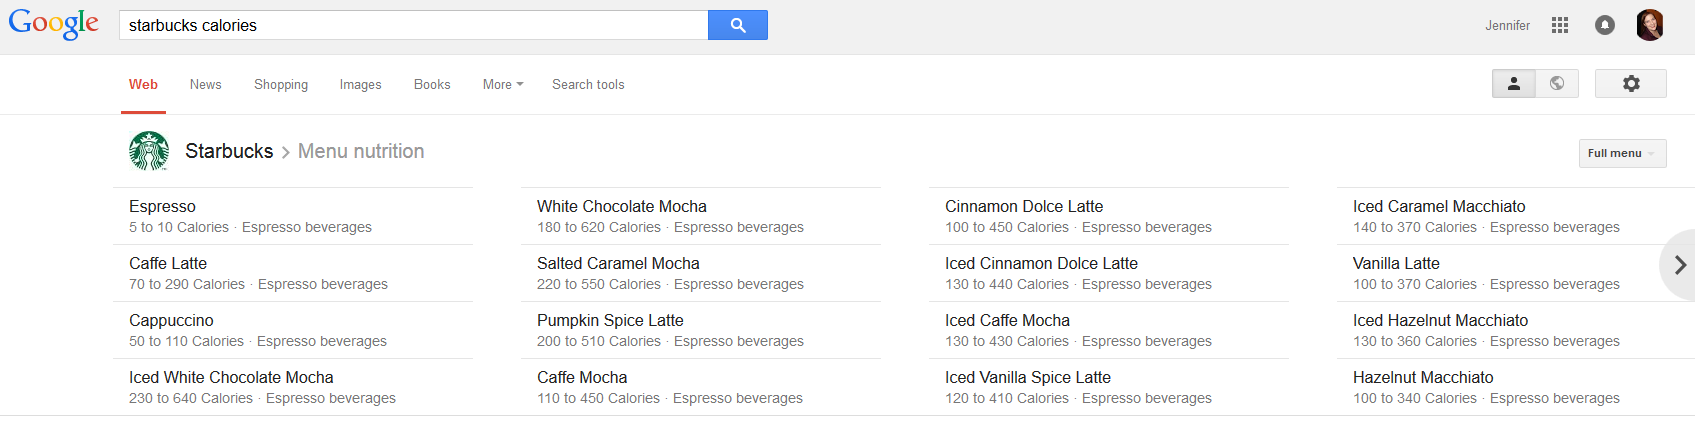 Google Adds Rich Lists for Calories in Restaurant Chain Menus